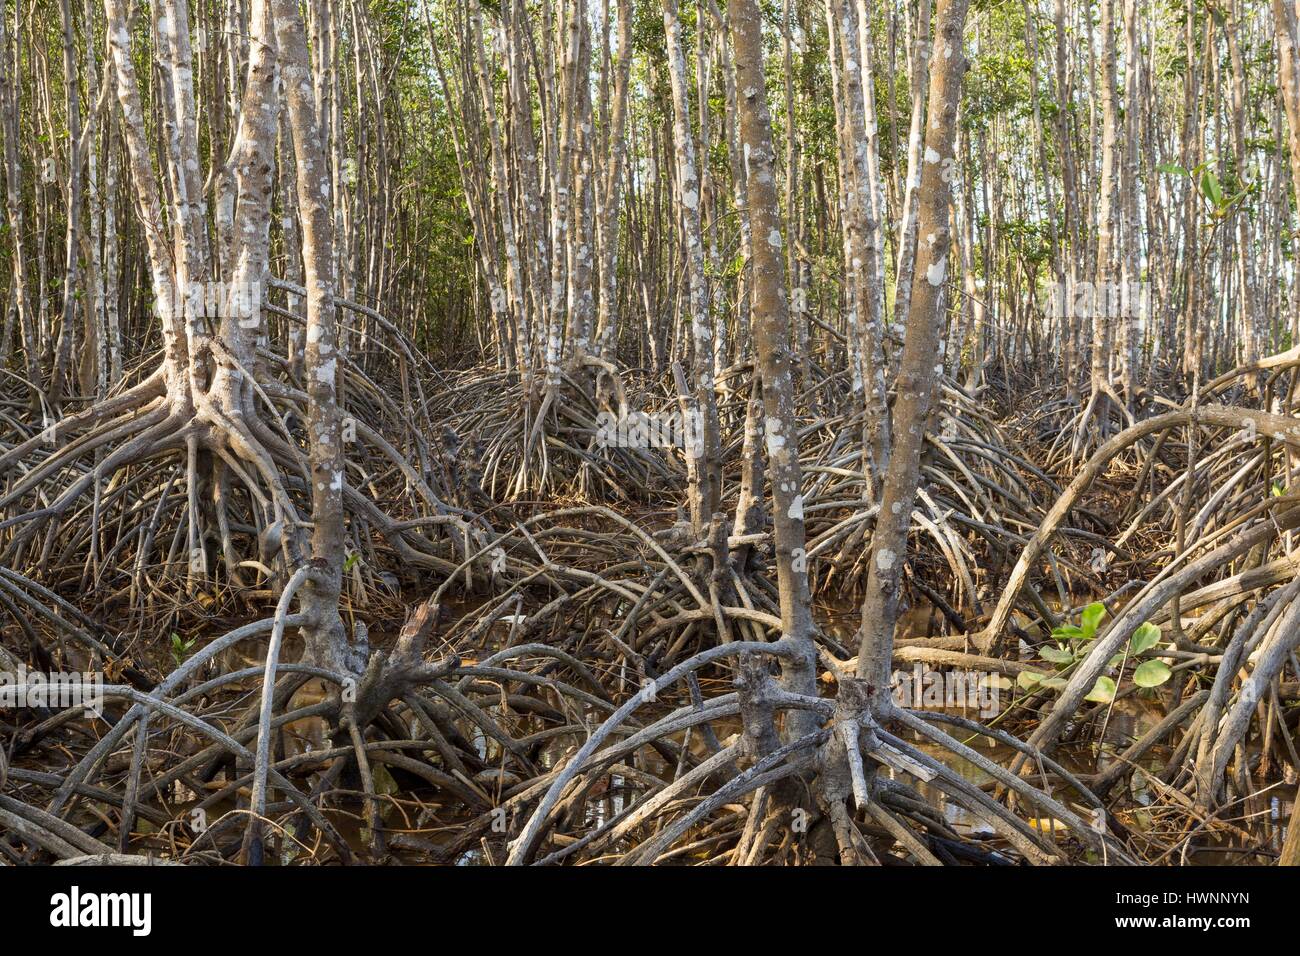 Philippines, Luzon, Sorsogon Province, Donsol, mangrove planted by villagers Stock Photo